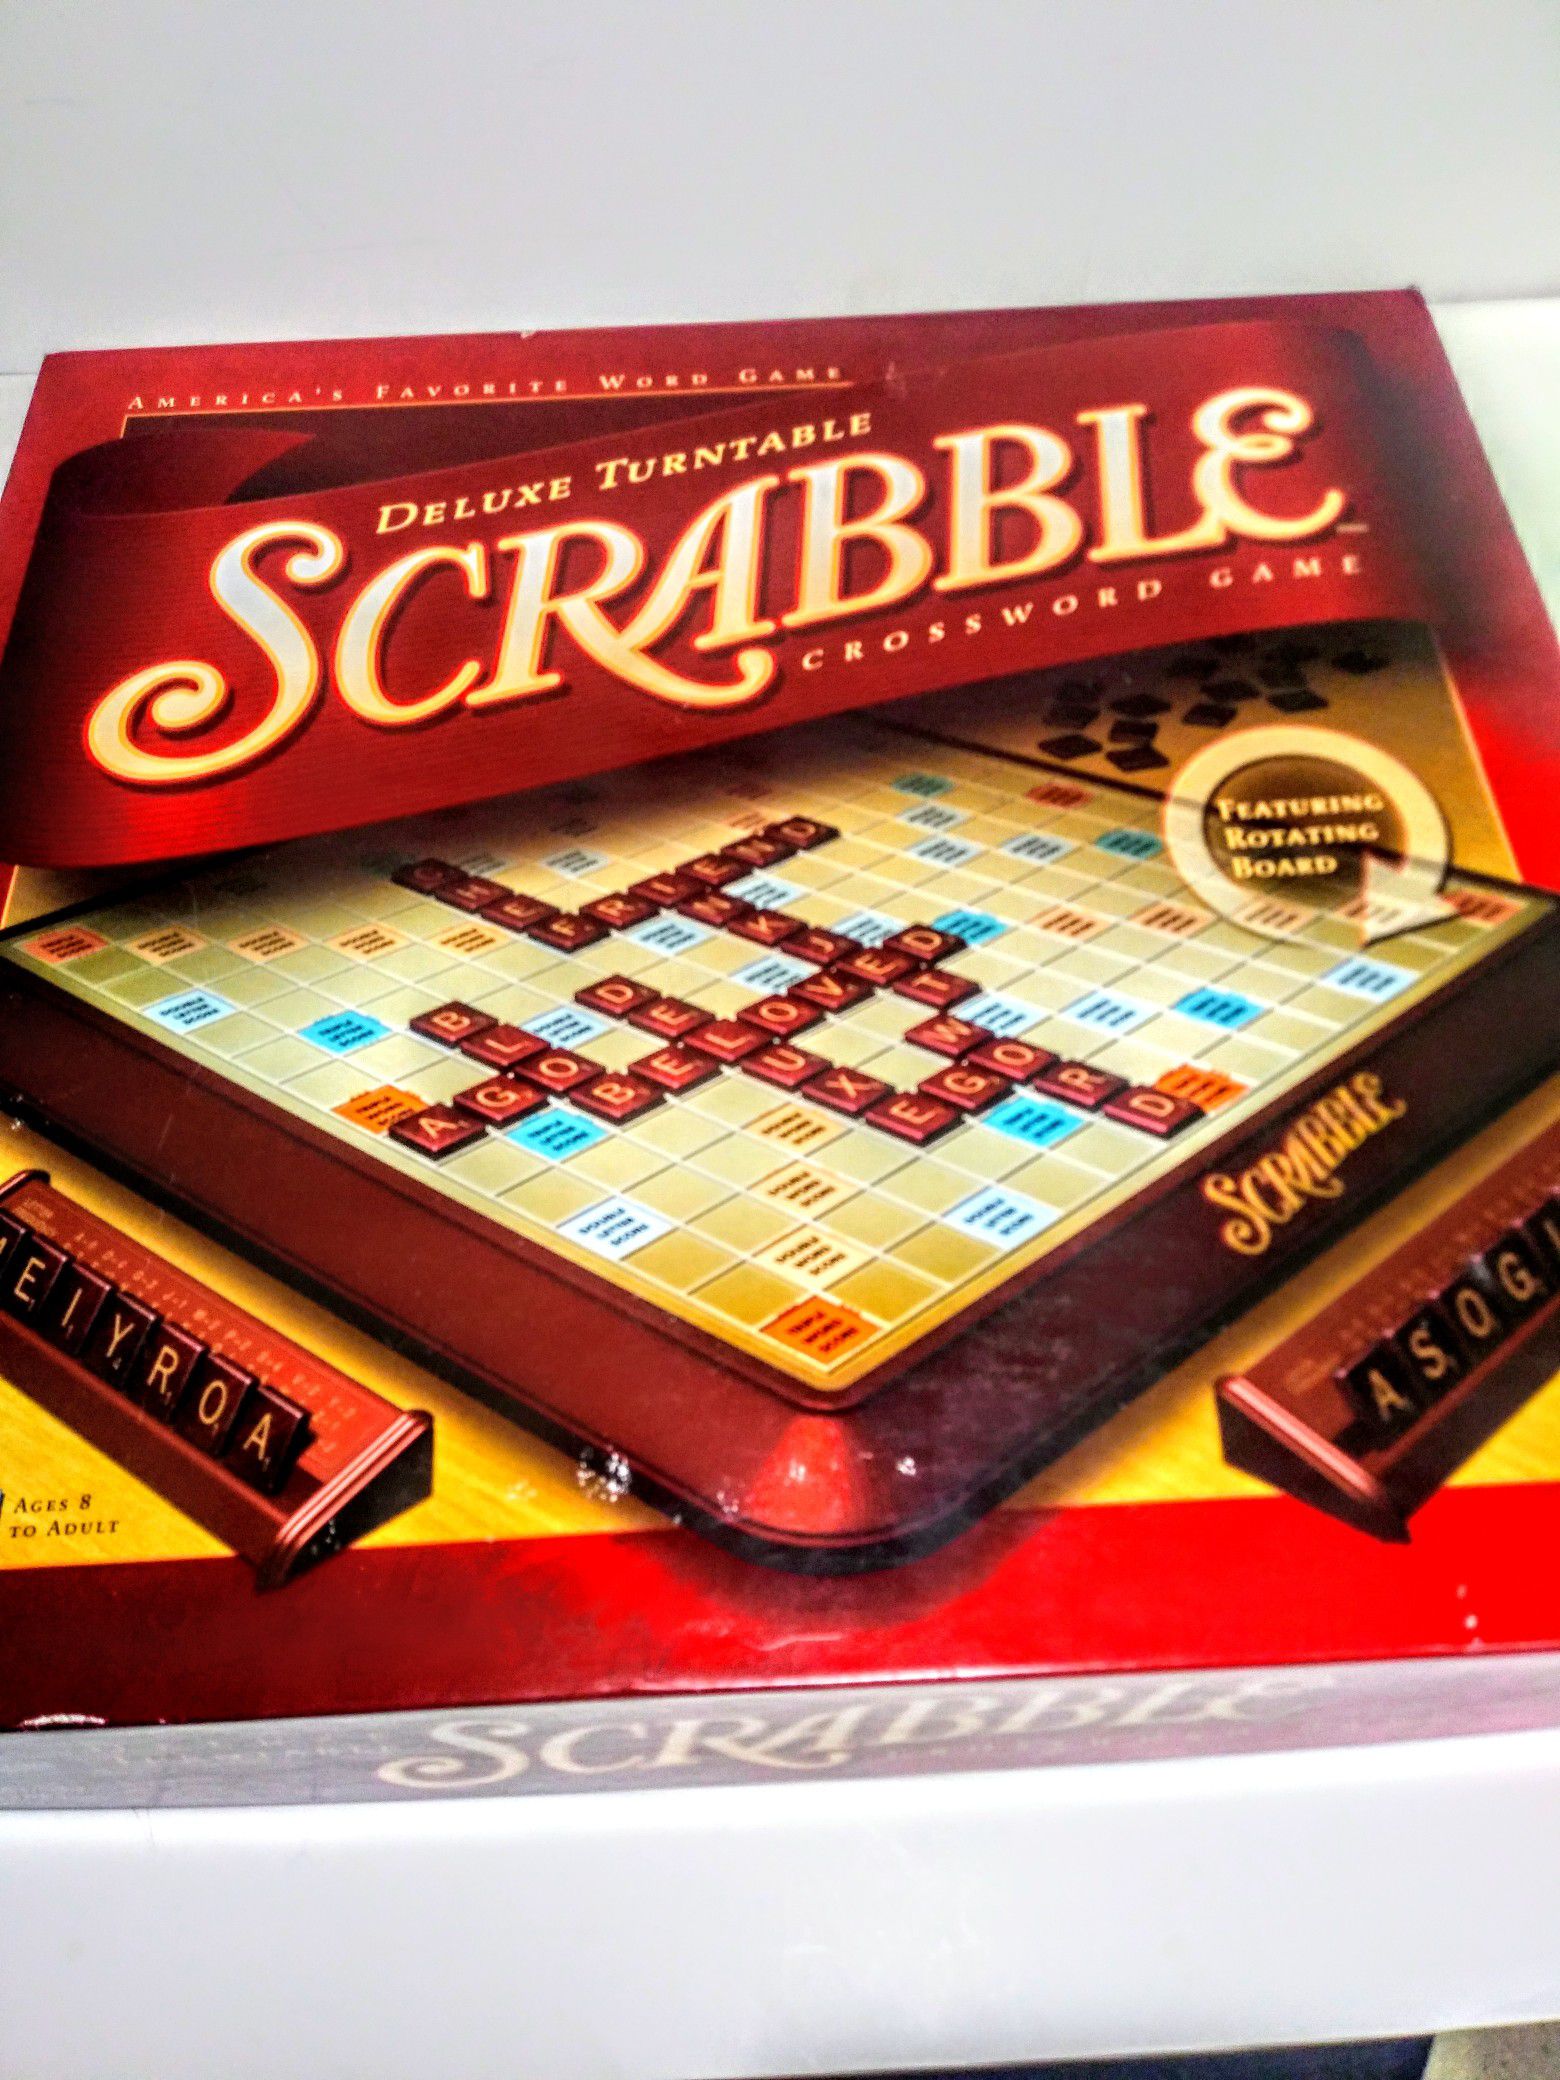 Deluxe Turntable Scrabble Board Game